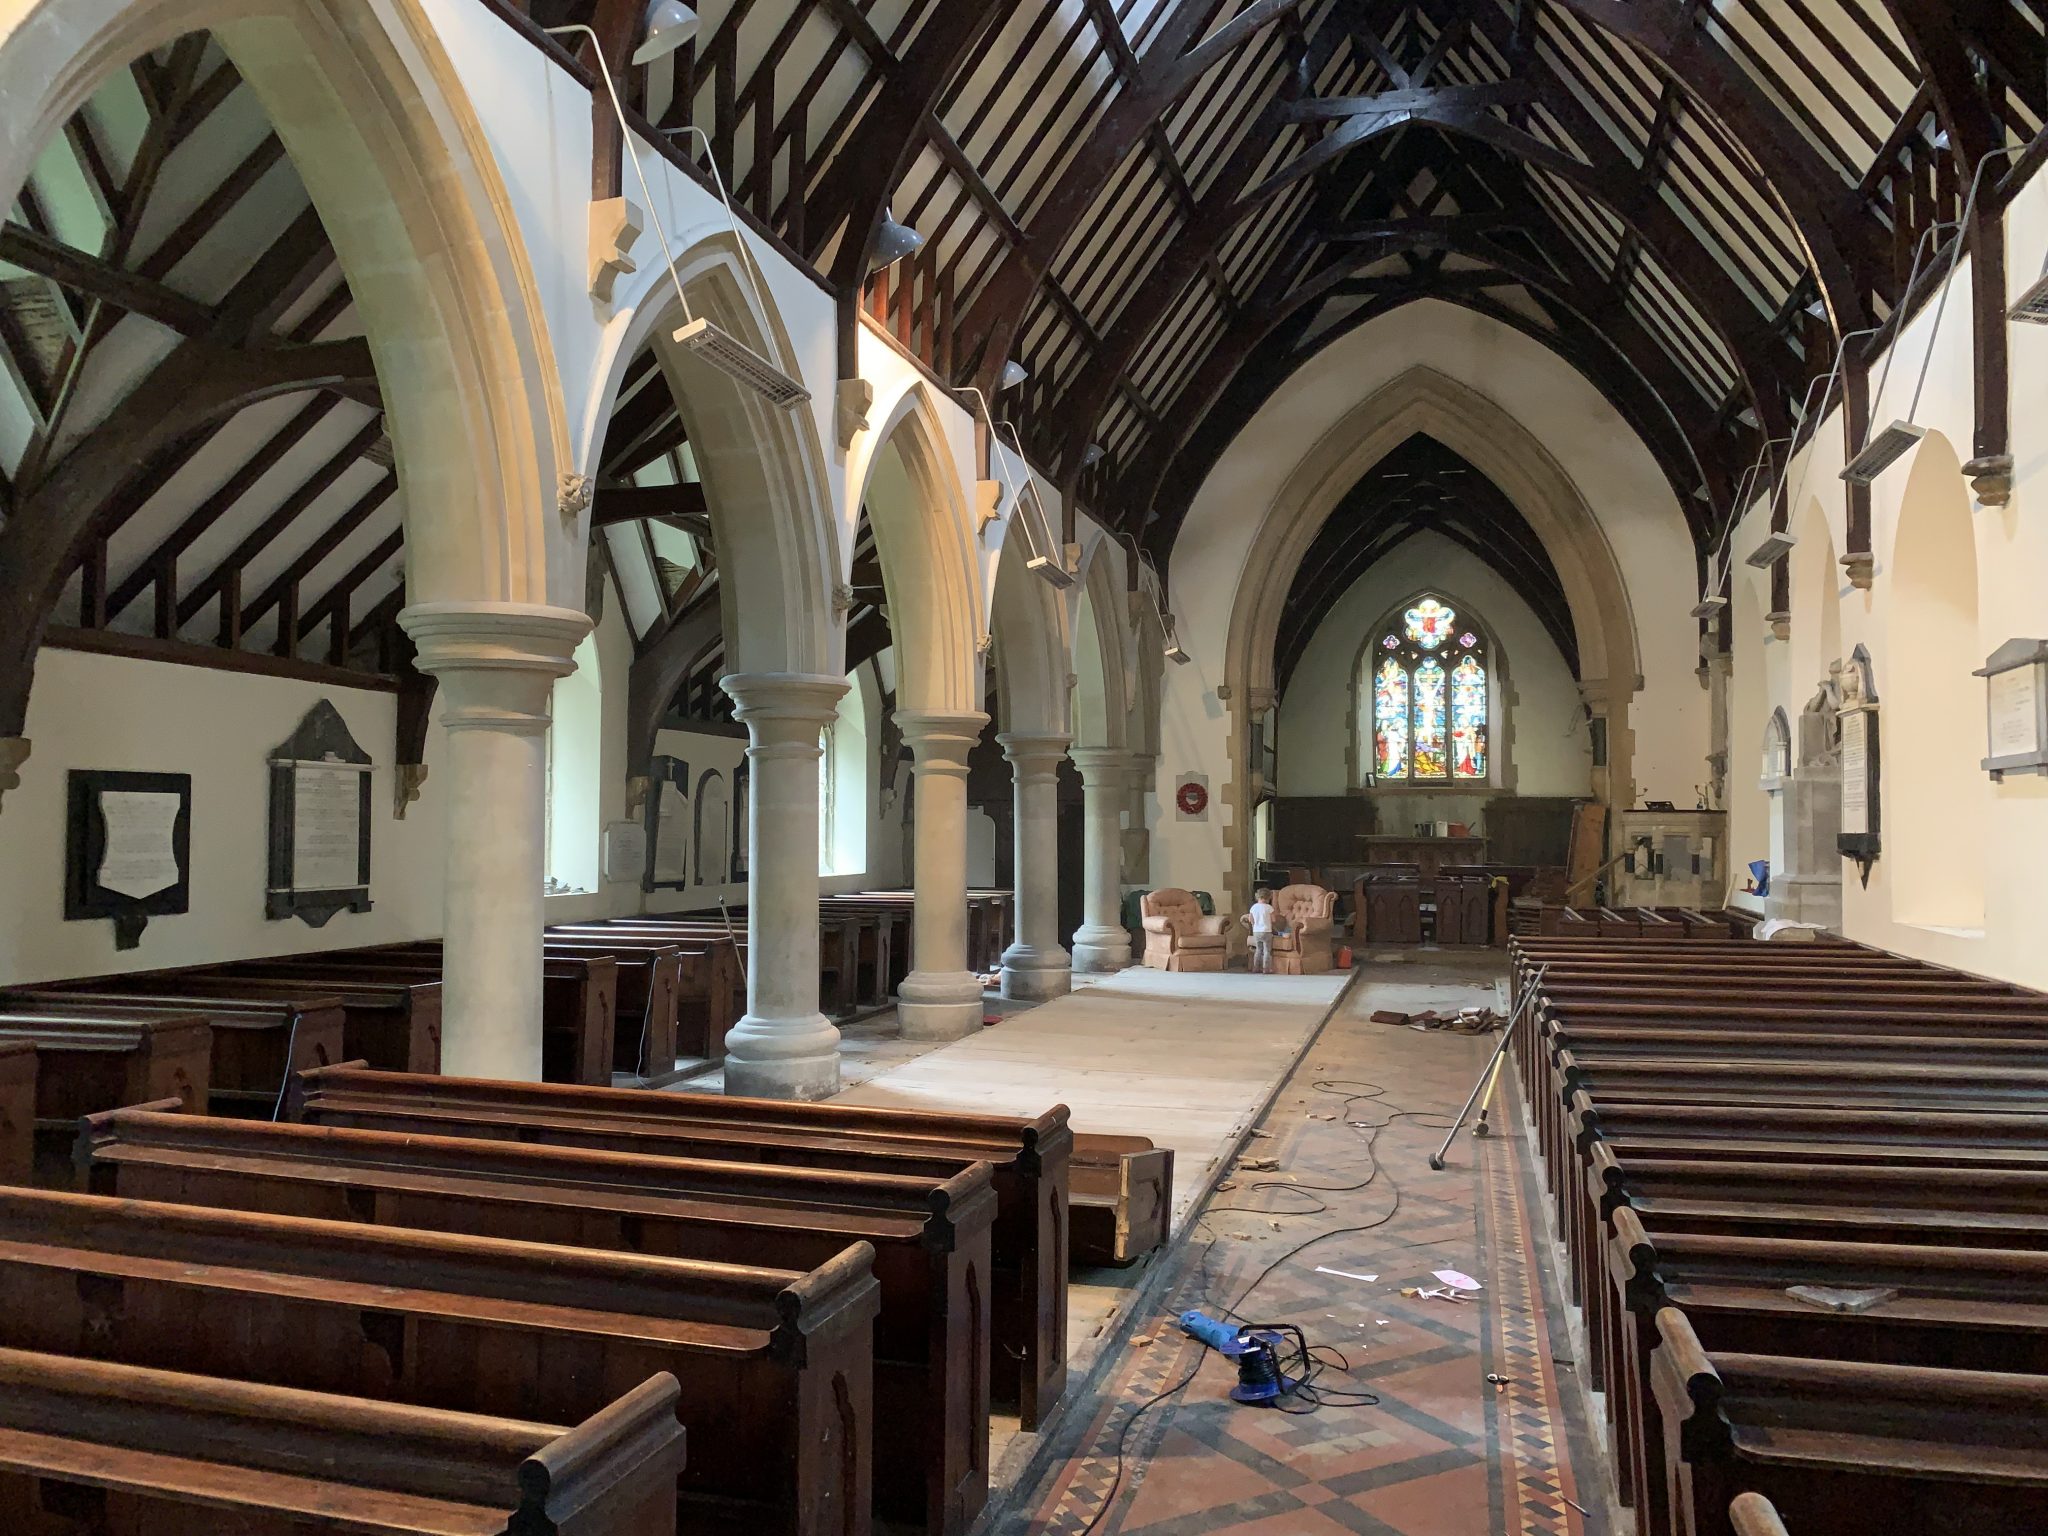 Removal Of The Pews